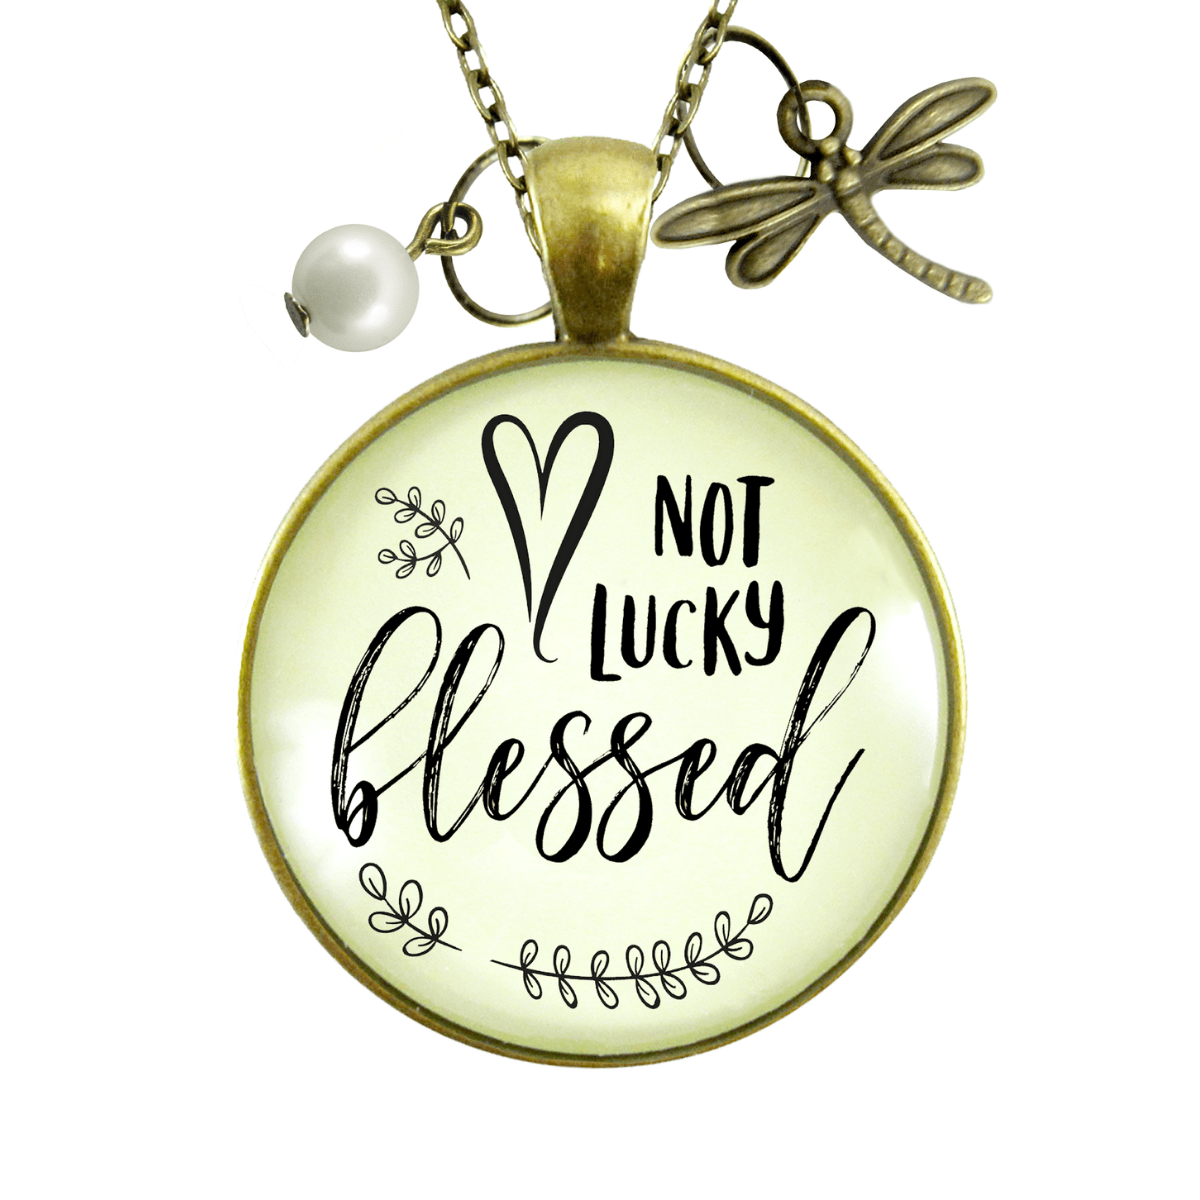 Not Lucky Blessed Thankful Grateful Saying Jewelry Dragonfly Charm - Gutsy Goodness